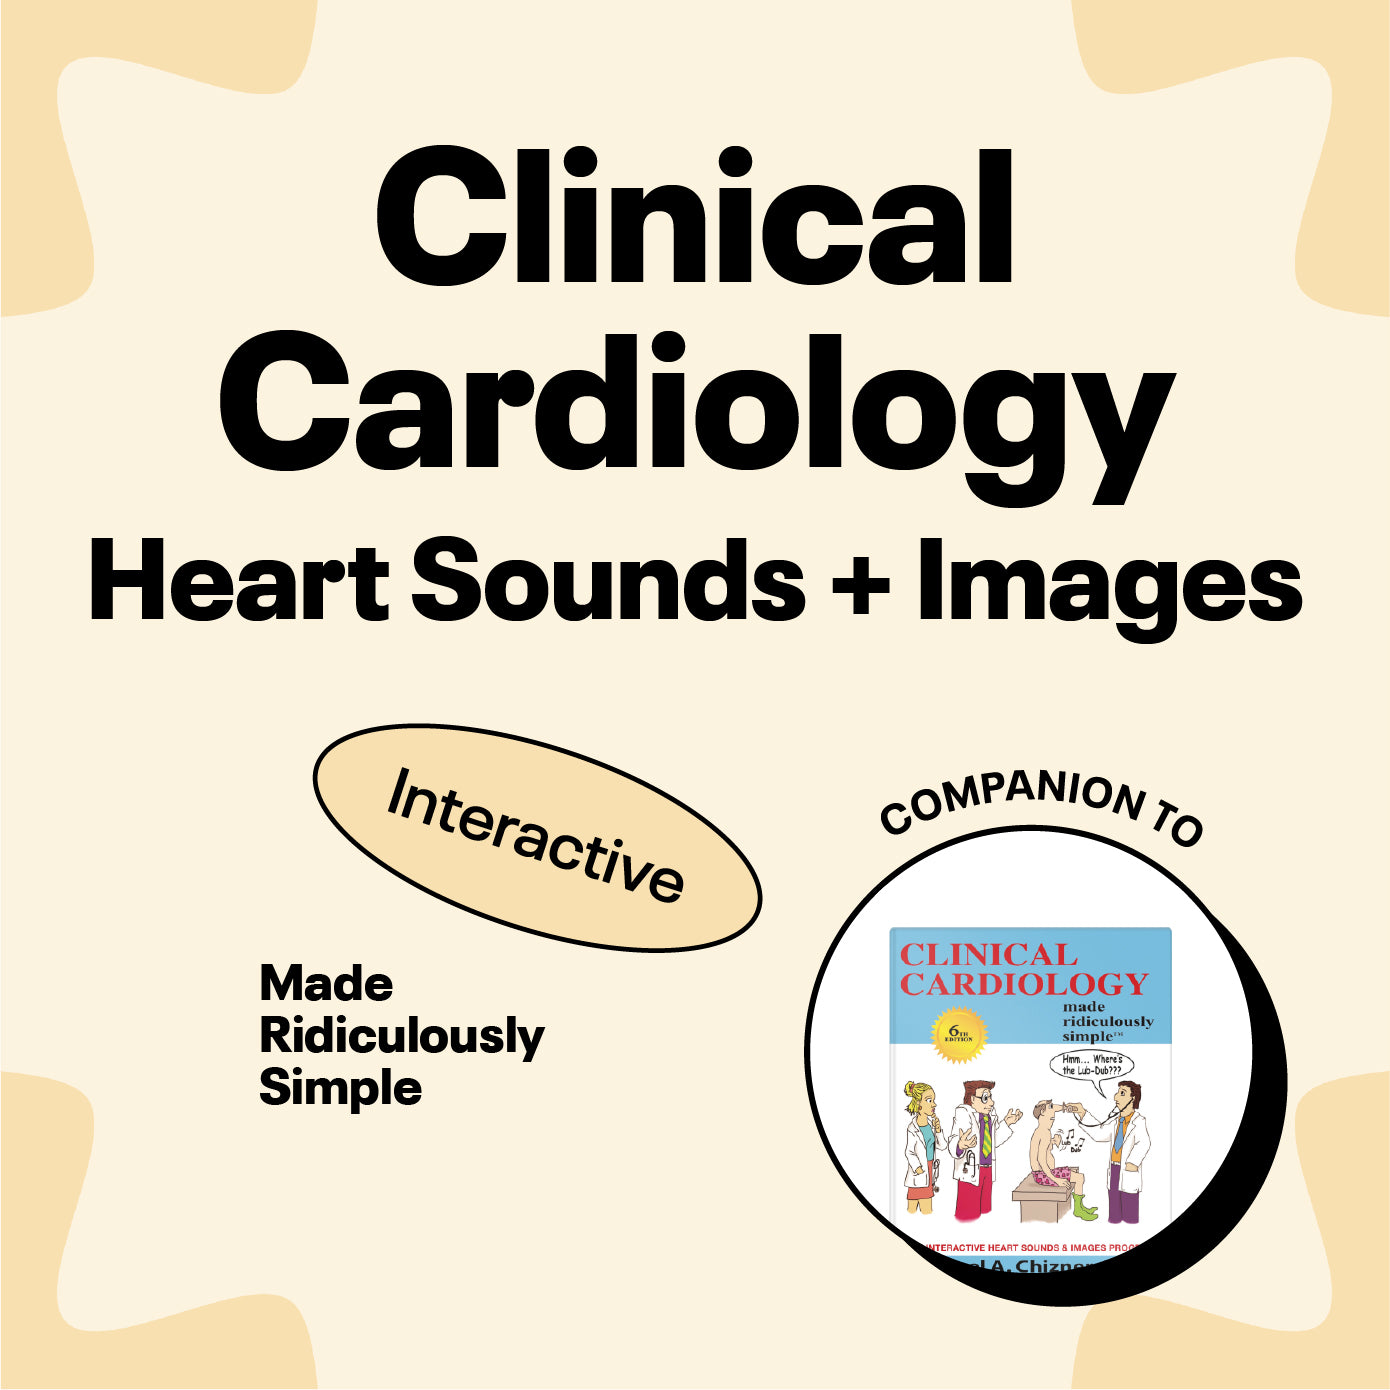 Clinical Cardiology Heart Sounds and Images Made Ridiculously Simple